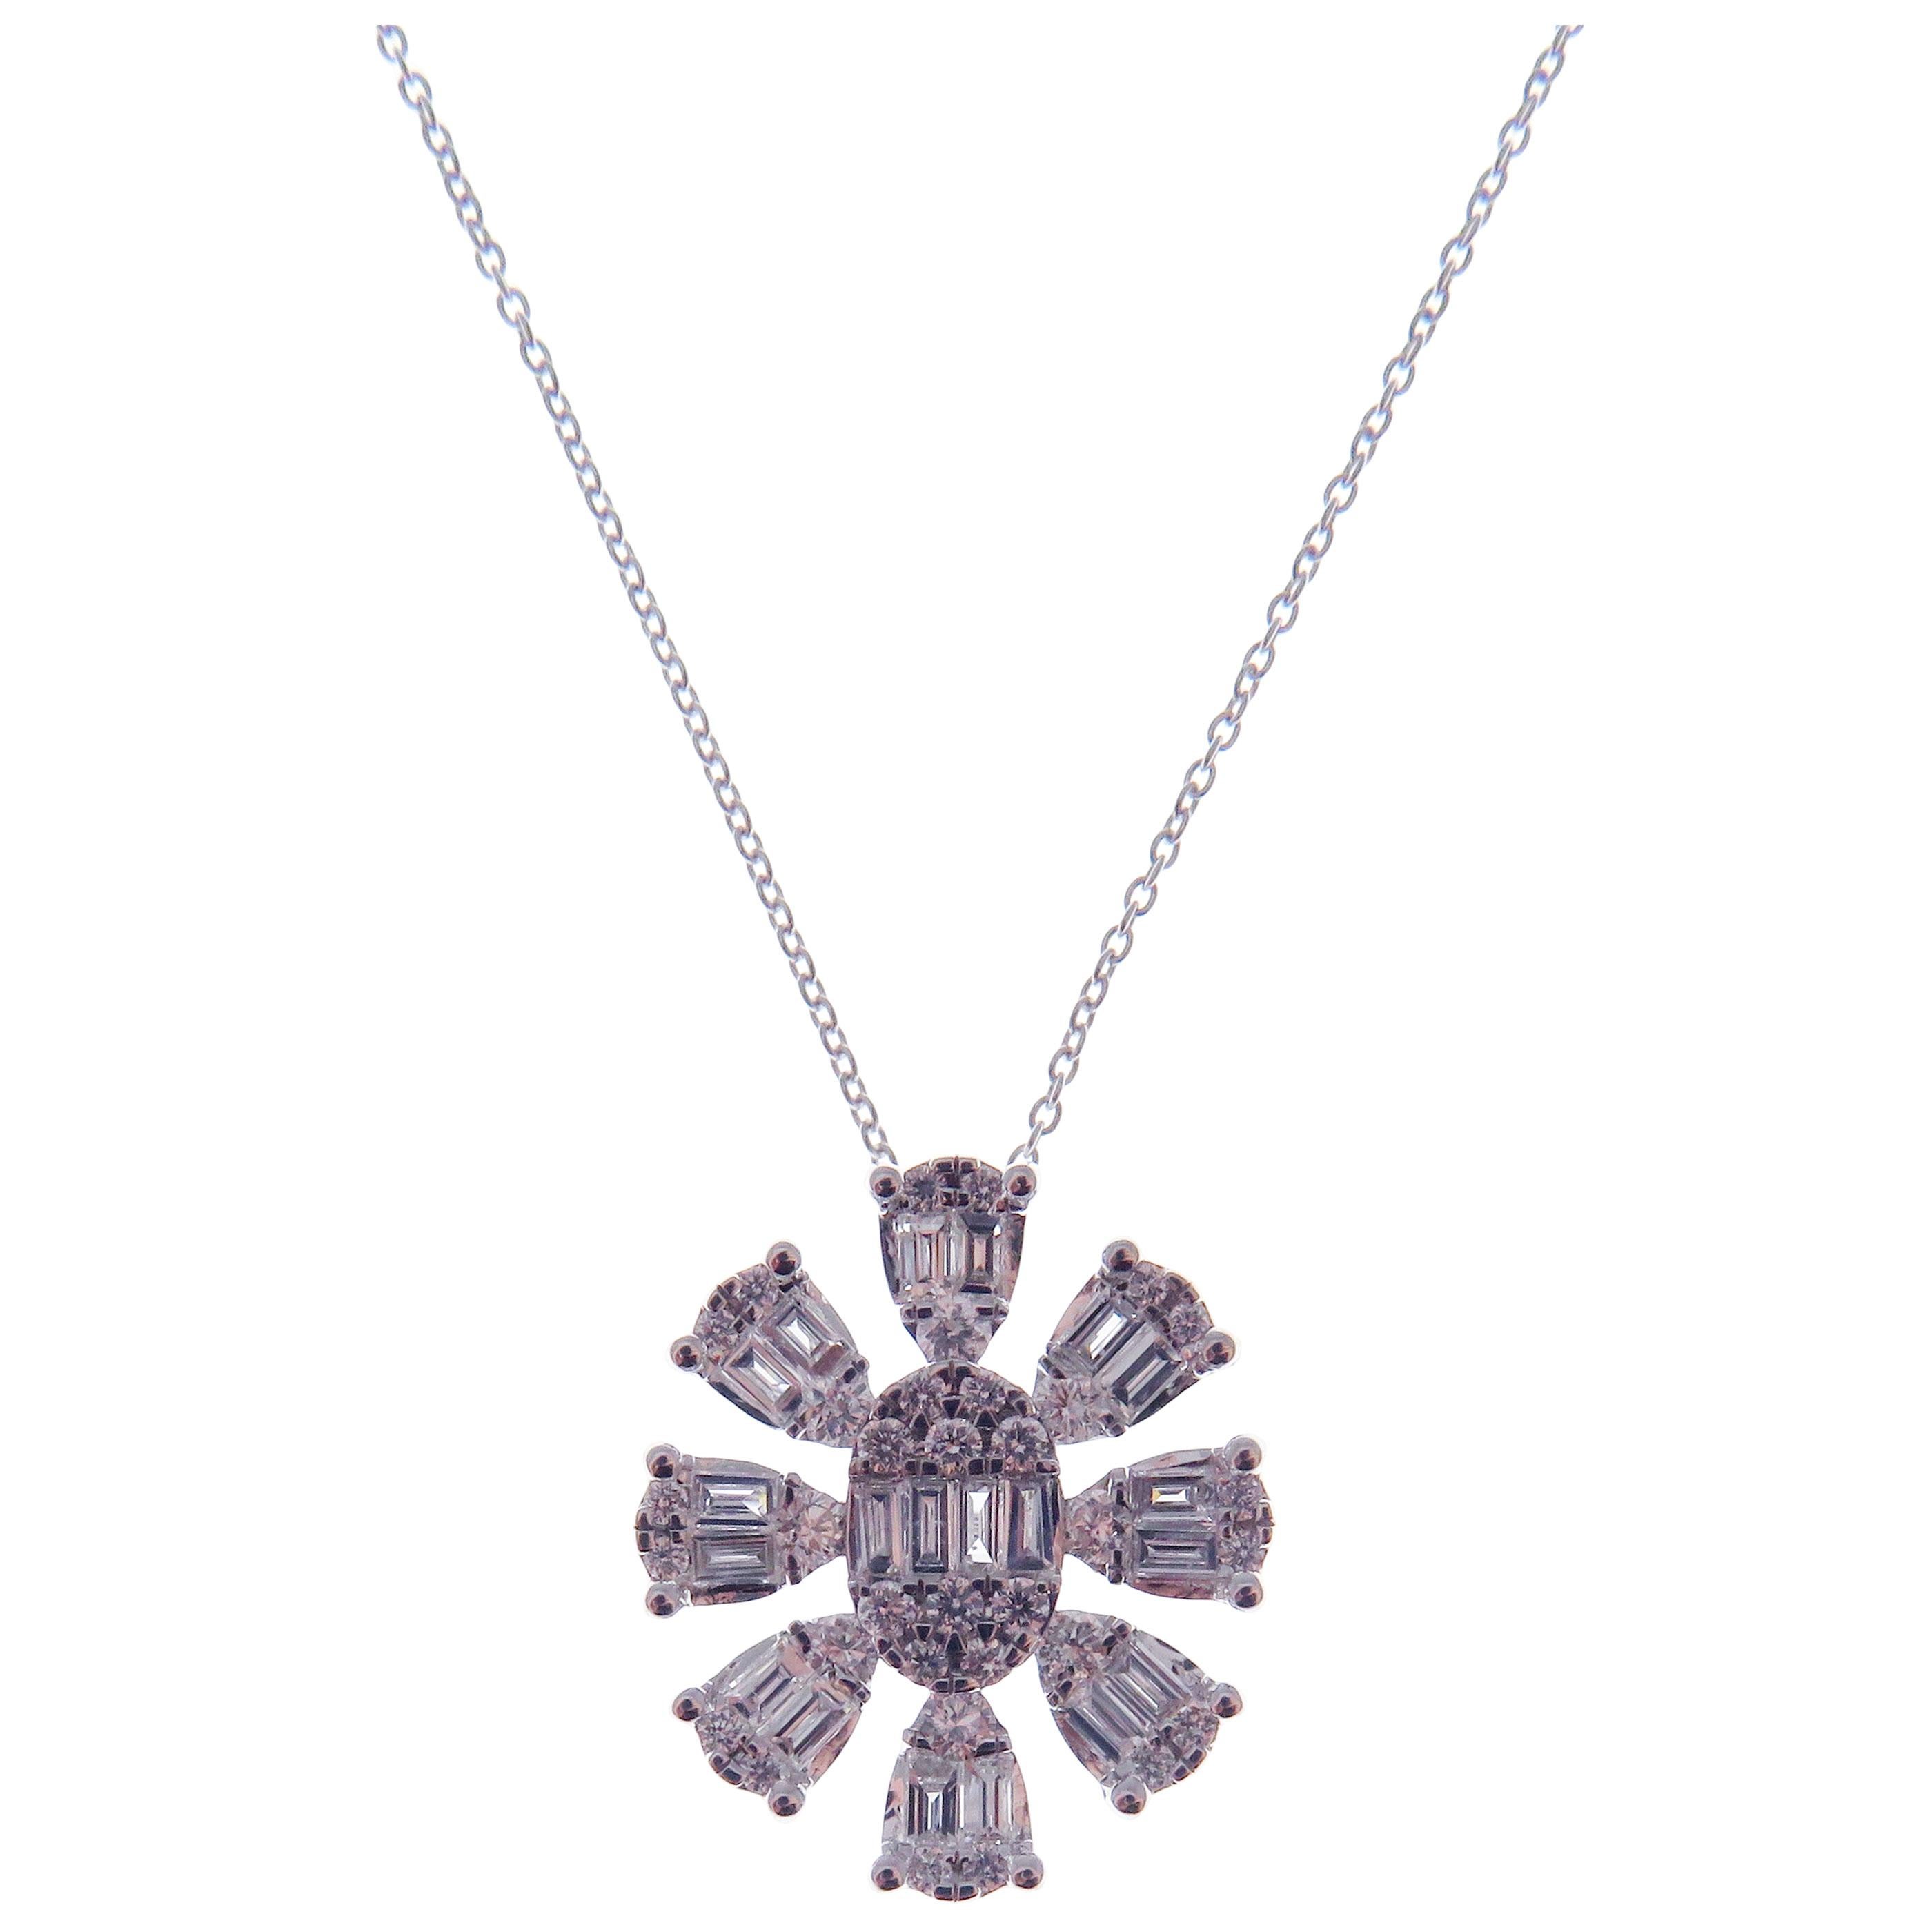 This snowflake inspired necklace is crafted in 18-karat white gold, featuring 34 round white diamonds totaling of 0.27 carats and 20 baguette white diamonds totaling of 0.40 carats.
Approximate total weight 3.70 grams.
VS-G Quality natural white